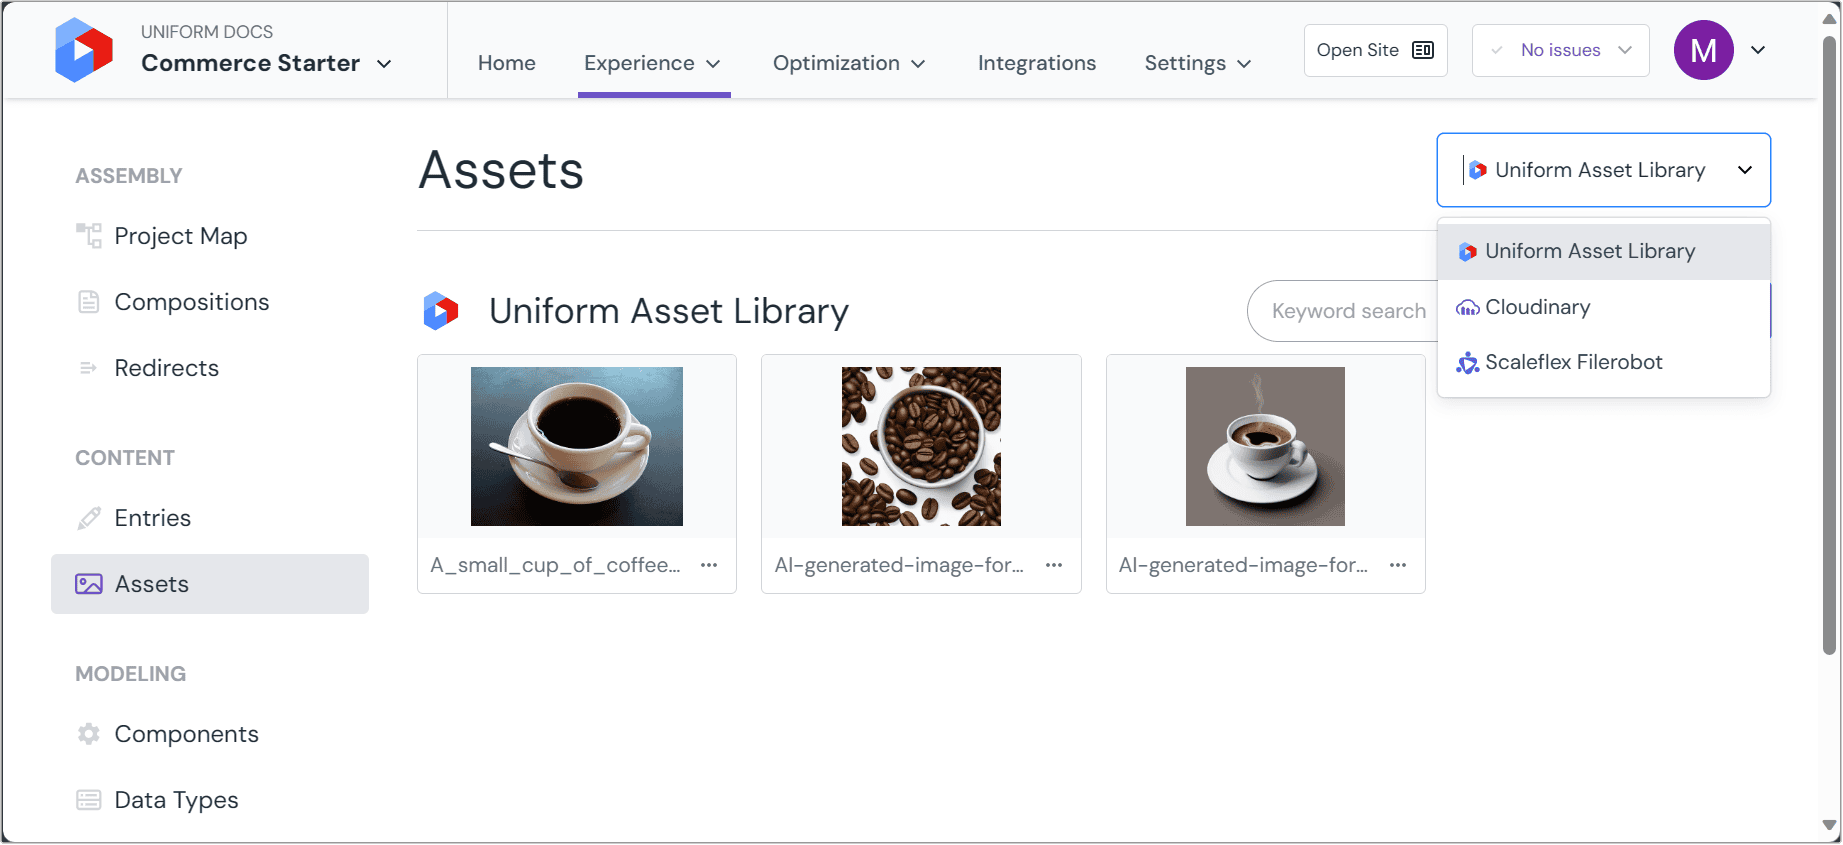 asset-library